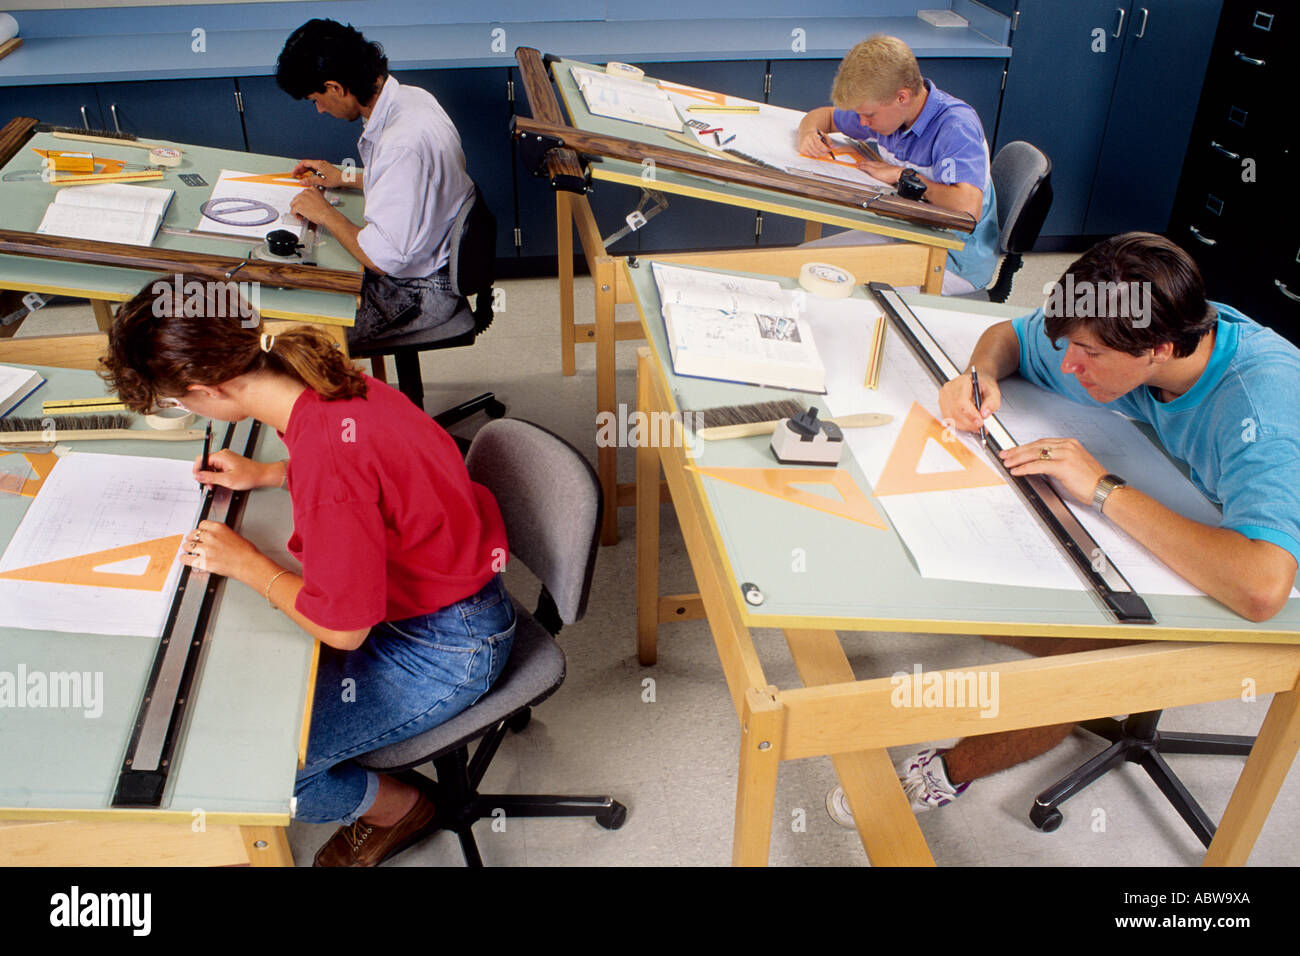 students-boys-and-girls-in-high-school-11th-grade-drafting-class-with-stock-photo-7411817-alamy